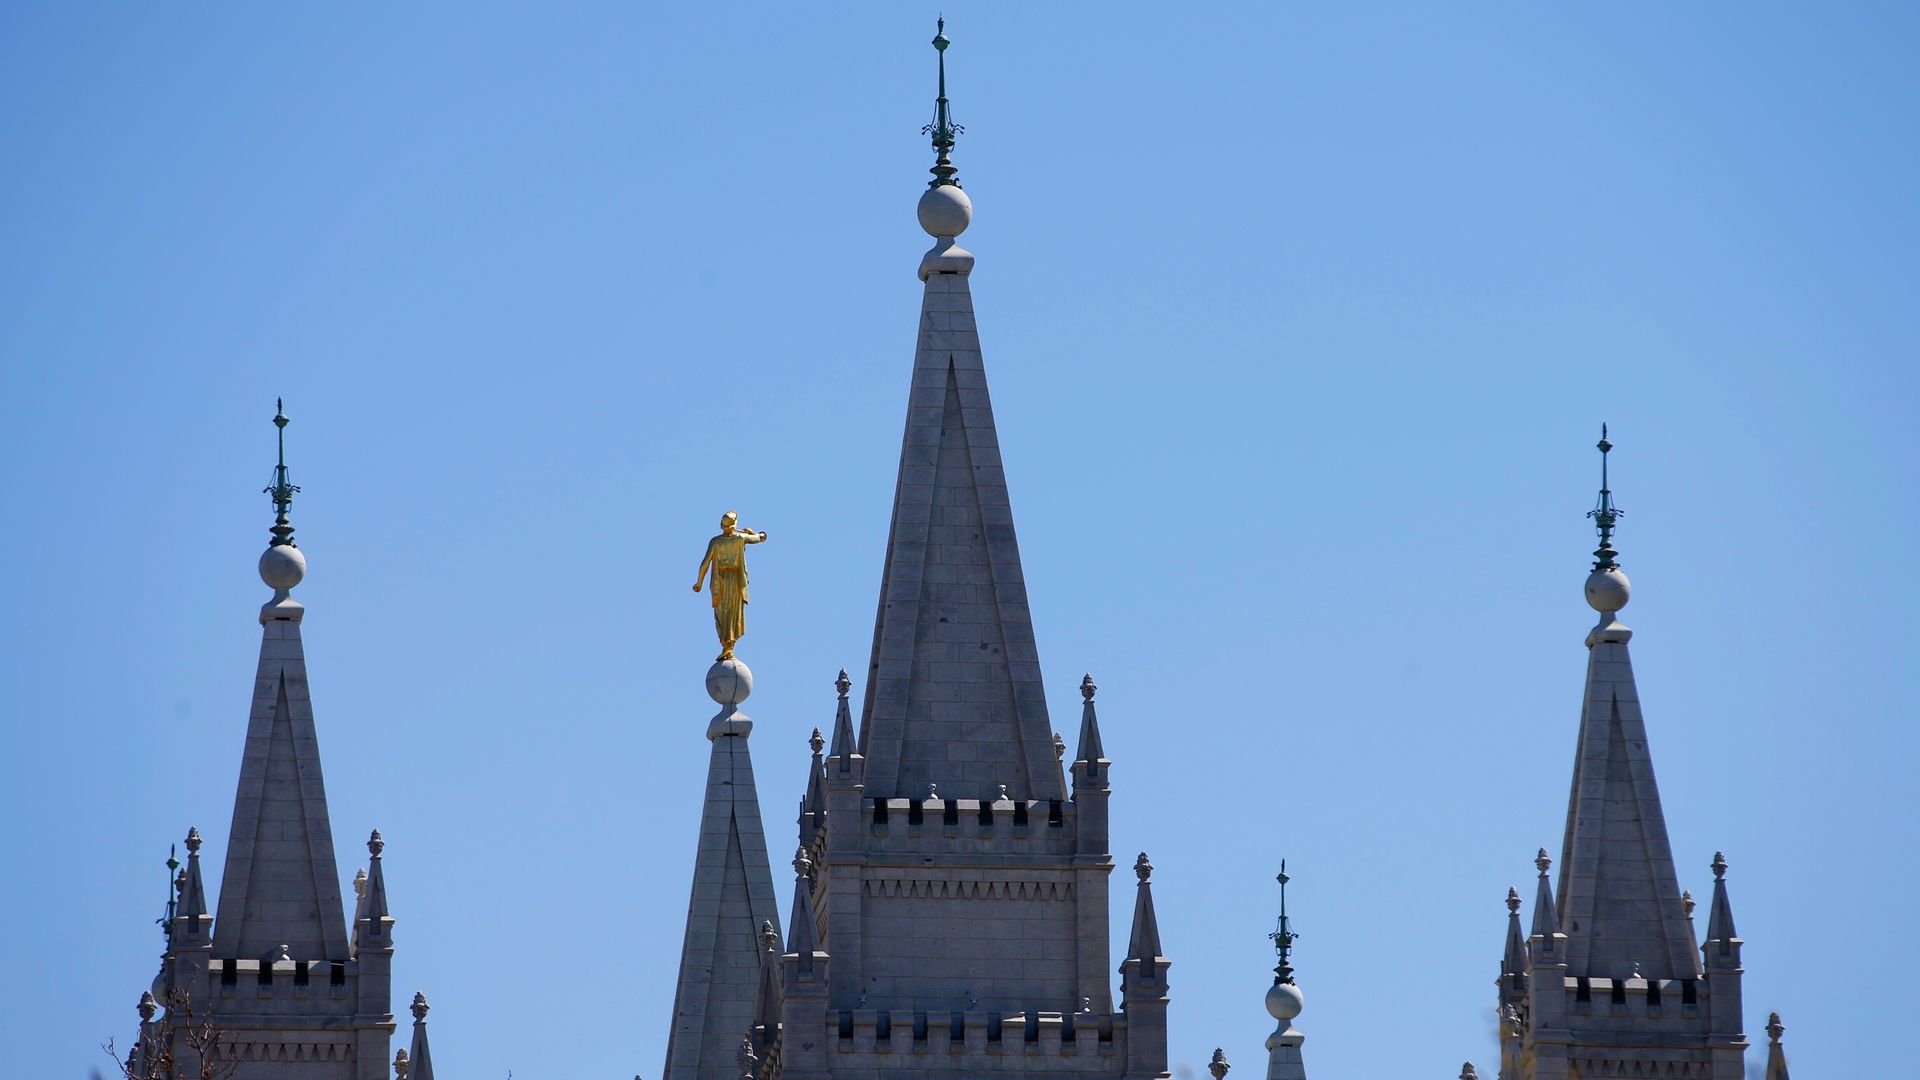 The spires of the Salt Lake City temple of the Church of Jesus Christ of Latter-day Saints appear in front of a blue sky. 